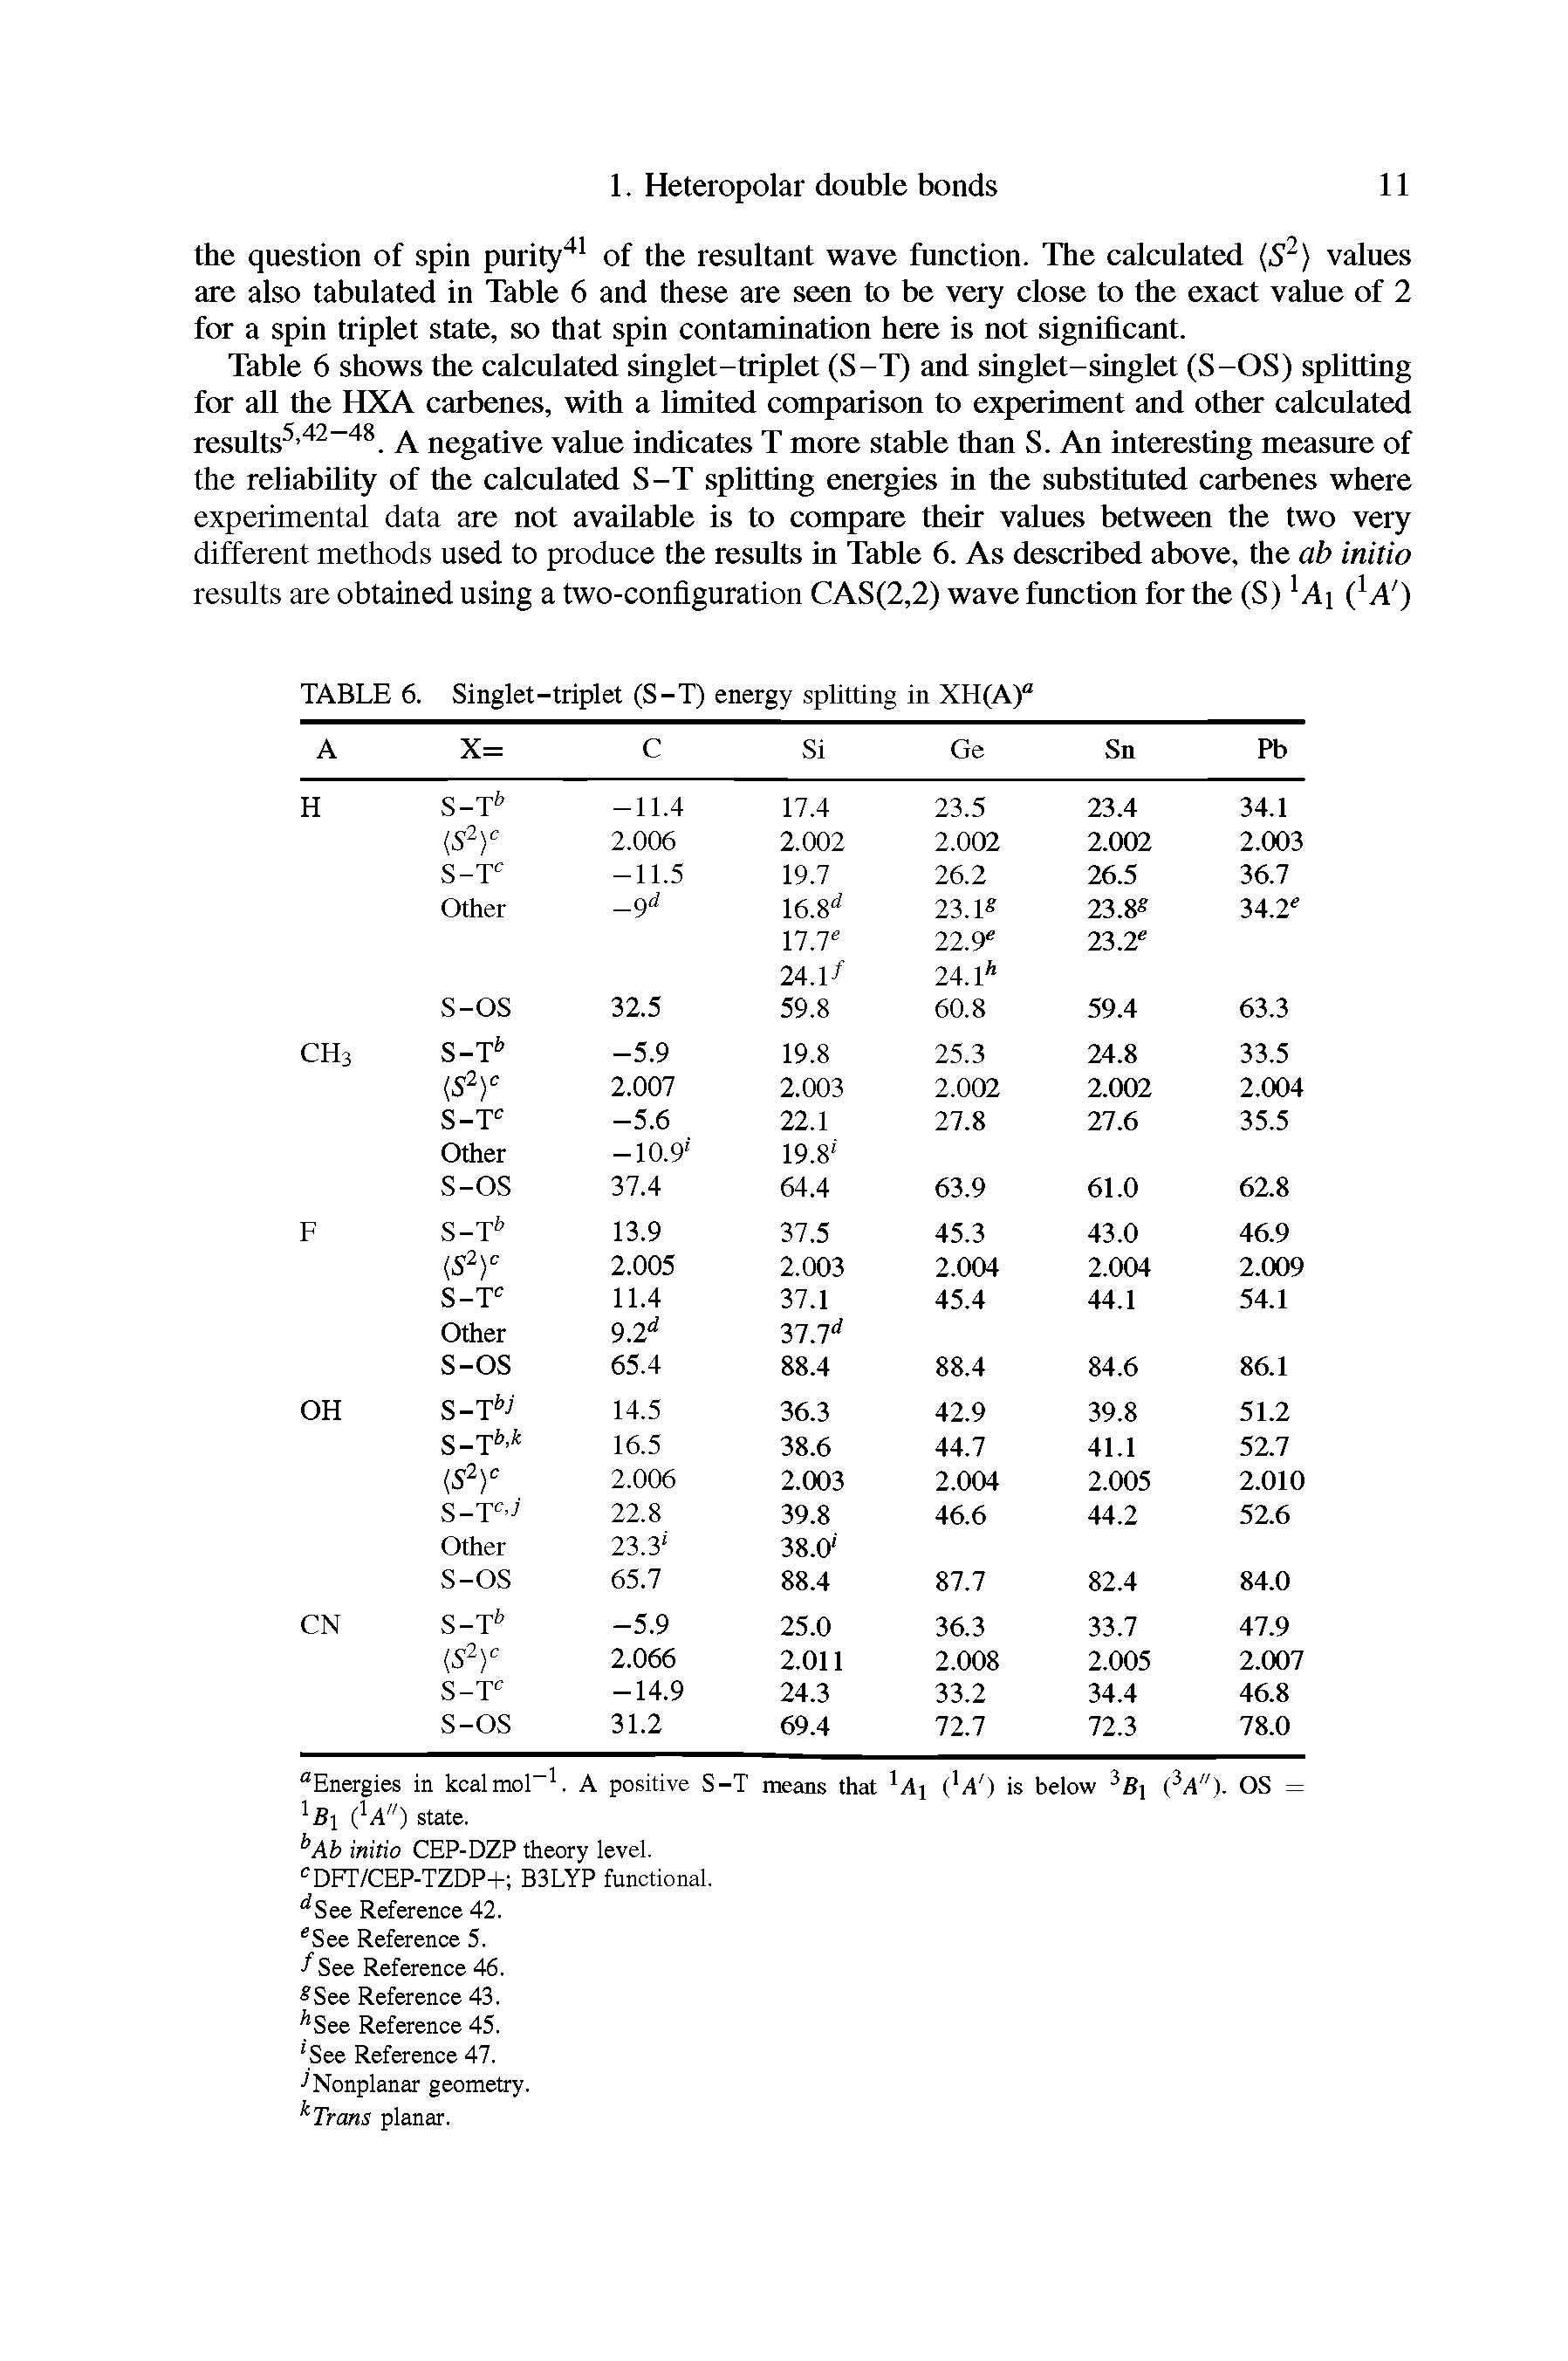 Table 6 shows the calculated singlet-triplet (S-T) and singlet-singlet (S-OS) splitting for all the HXA carbenes, with a limited comparison to experiment and other calculated results5,42-48. A negative value indicates T more stable than S. An interesting measure of the reliability of the calculated S-T splitting energies in the substituted carbenes where experimental data are not available is to compare their values between the two very different methods used to produce the results in Table 6. As described above, the ab initio results are obtained using a two-configuration CAS(2,2) wave function for the (S)1 Ai A )...